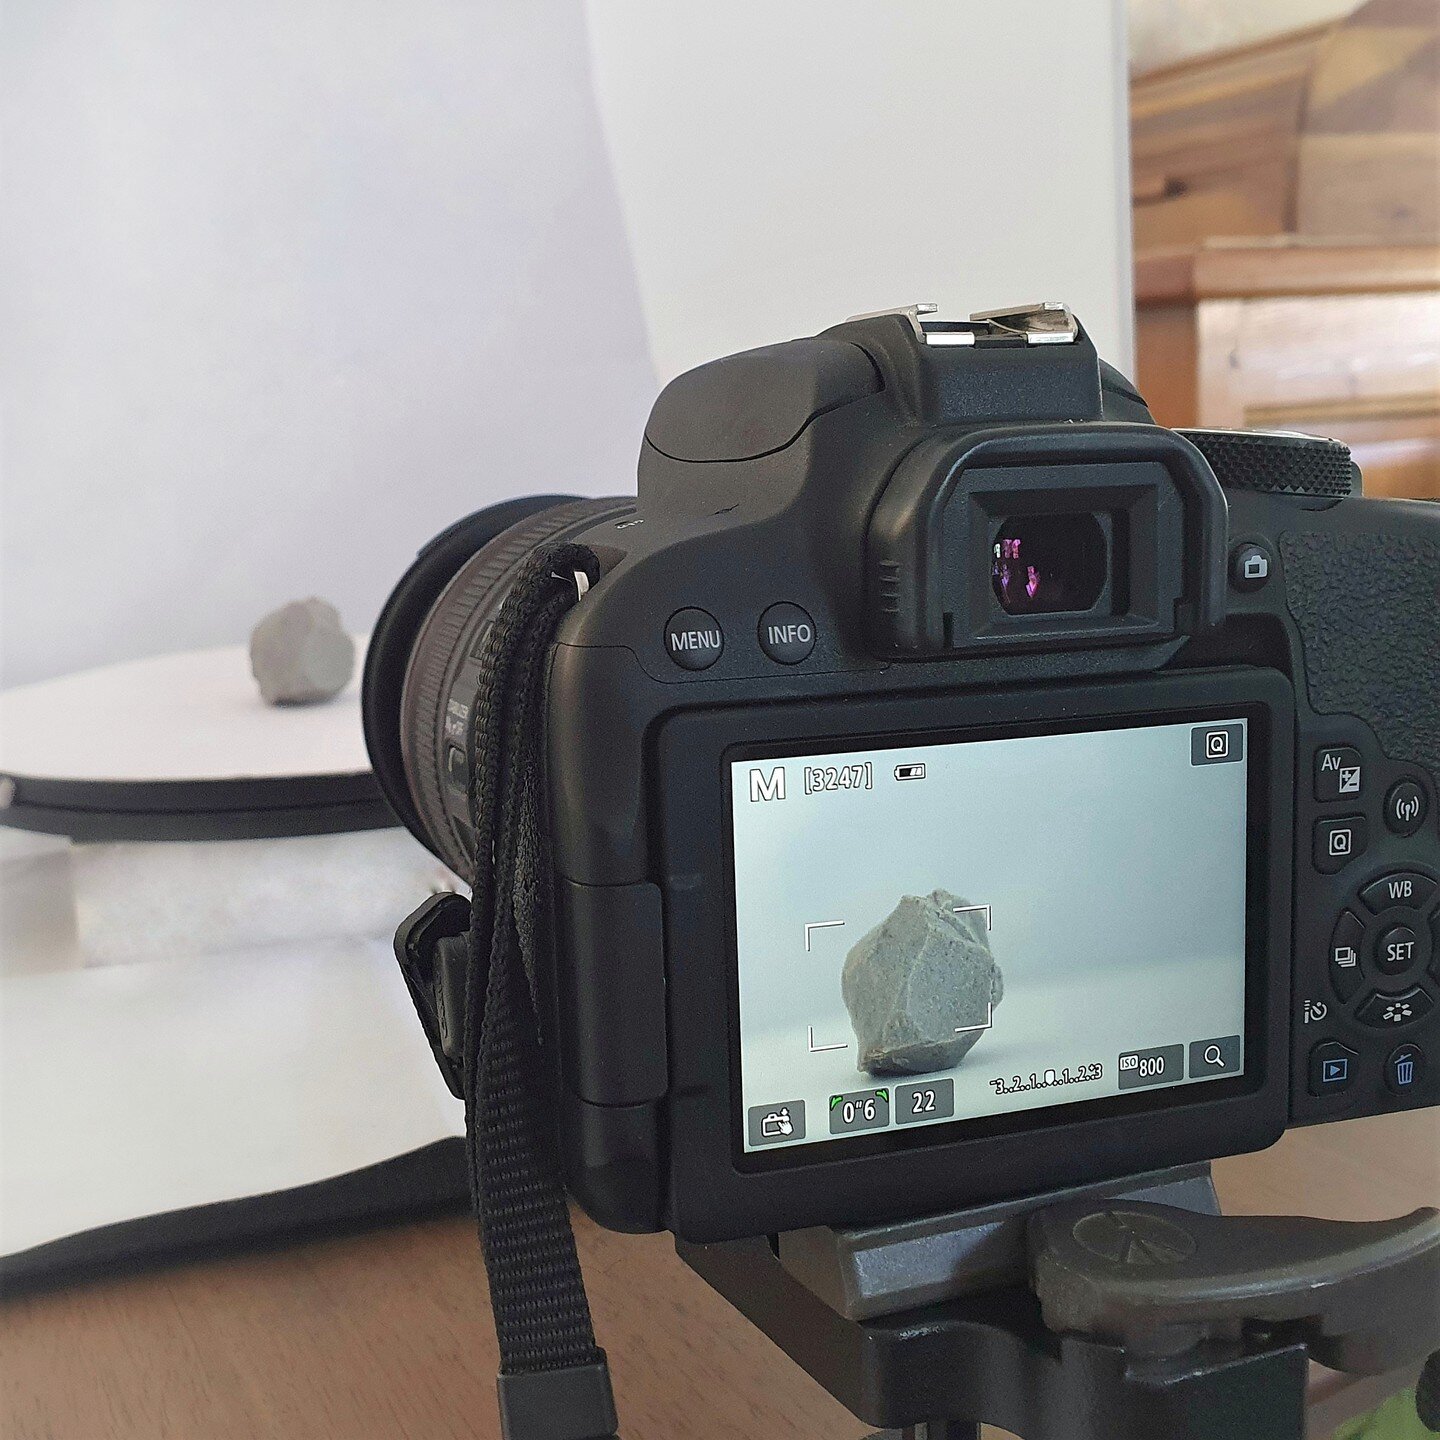 Archaeology isn't just about digging in the dirt, photography is an important aspect of recording sites and artefact details. With quality equipment and a team of professionals that know their way around a camera, Everick ensures that the archaeologi